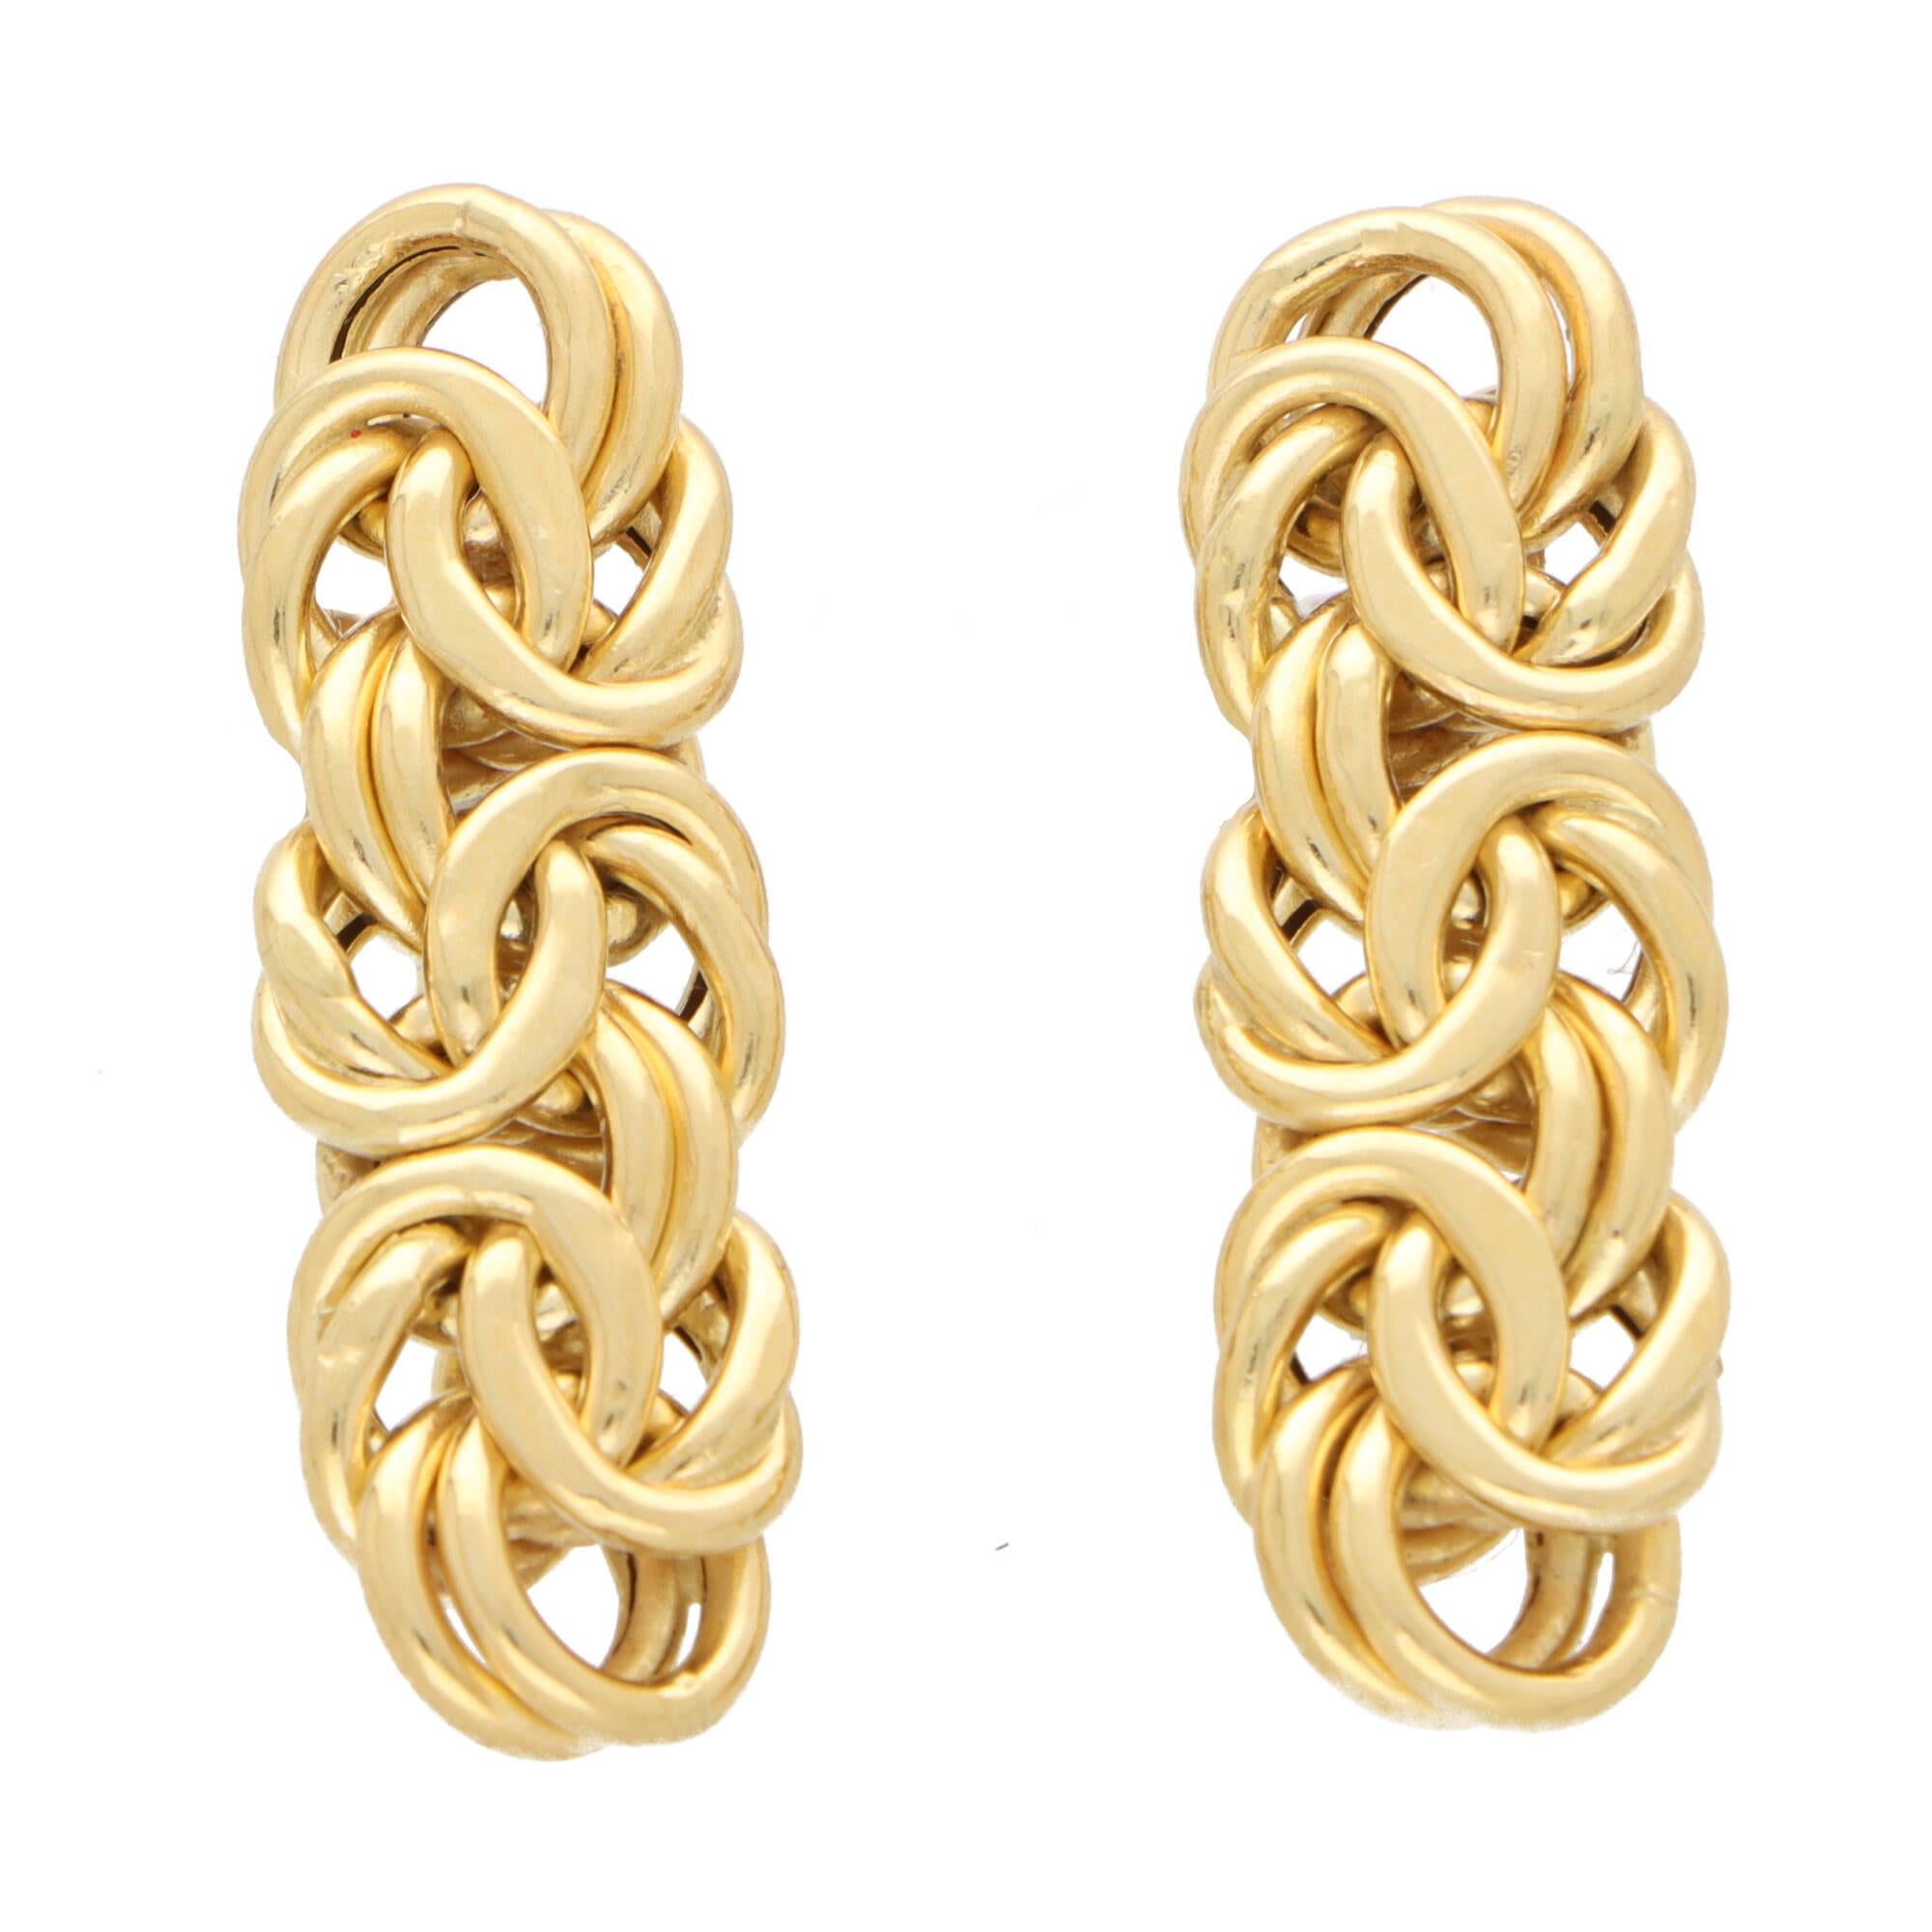 Retro Vintage Knotted Long Drop Earrings Set in 18k Yellow Gold For Sale